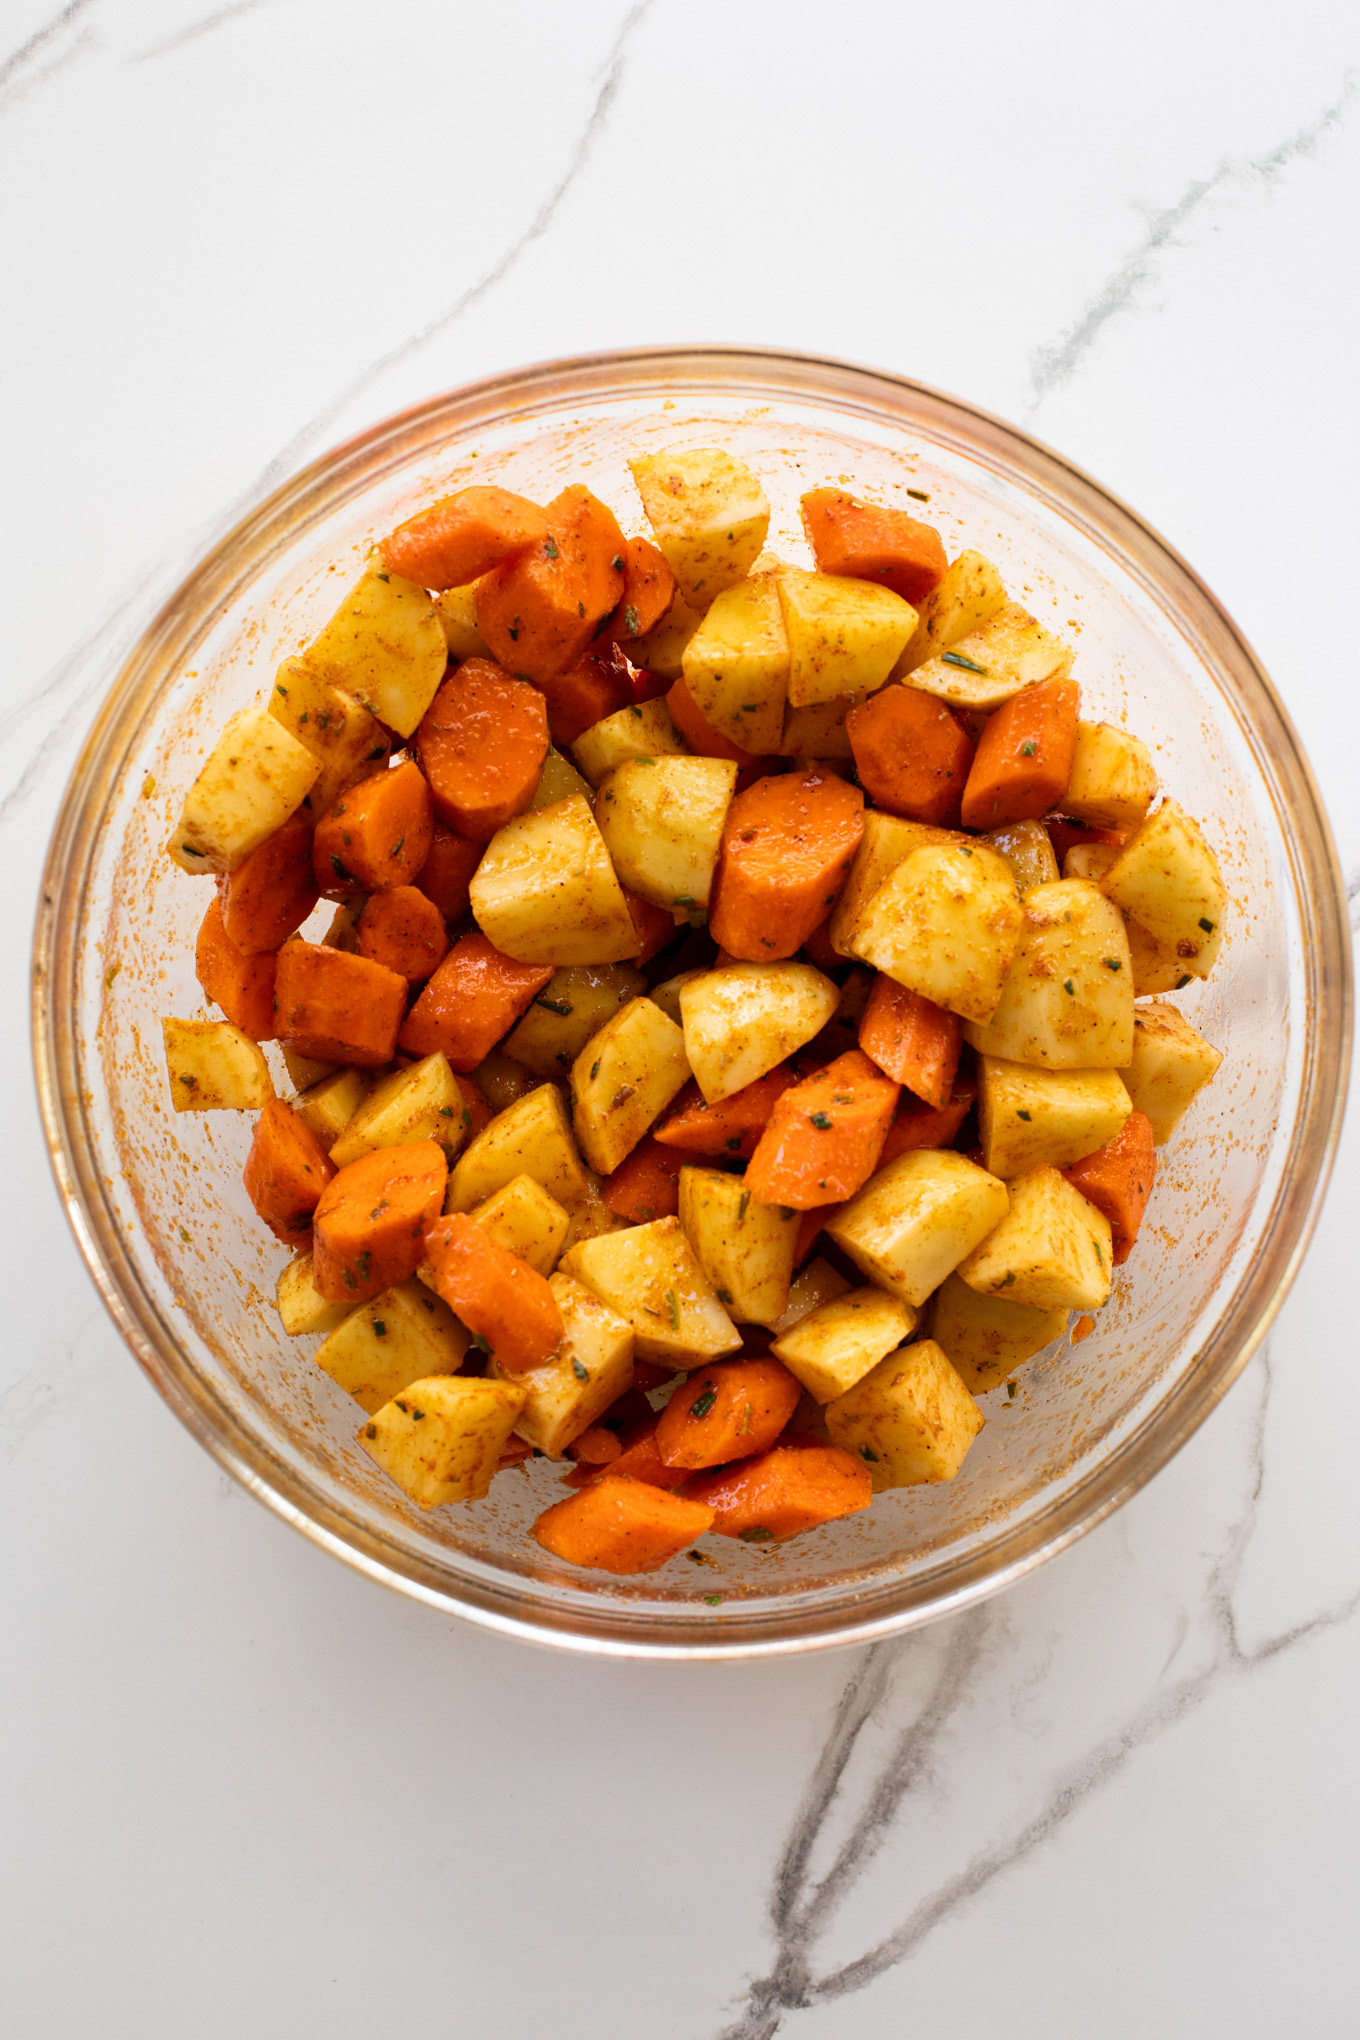 mixed potatoes and carrots with spices in a bowl.